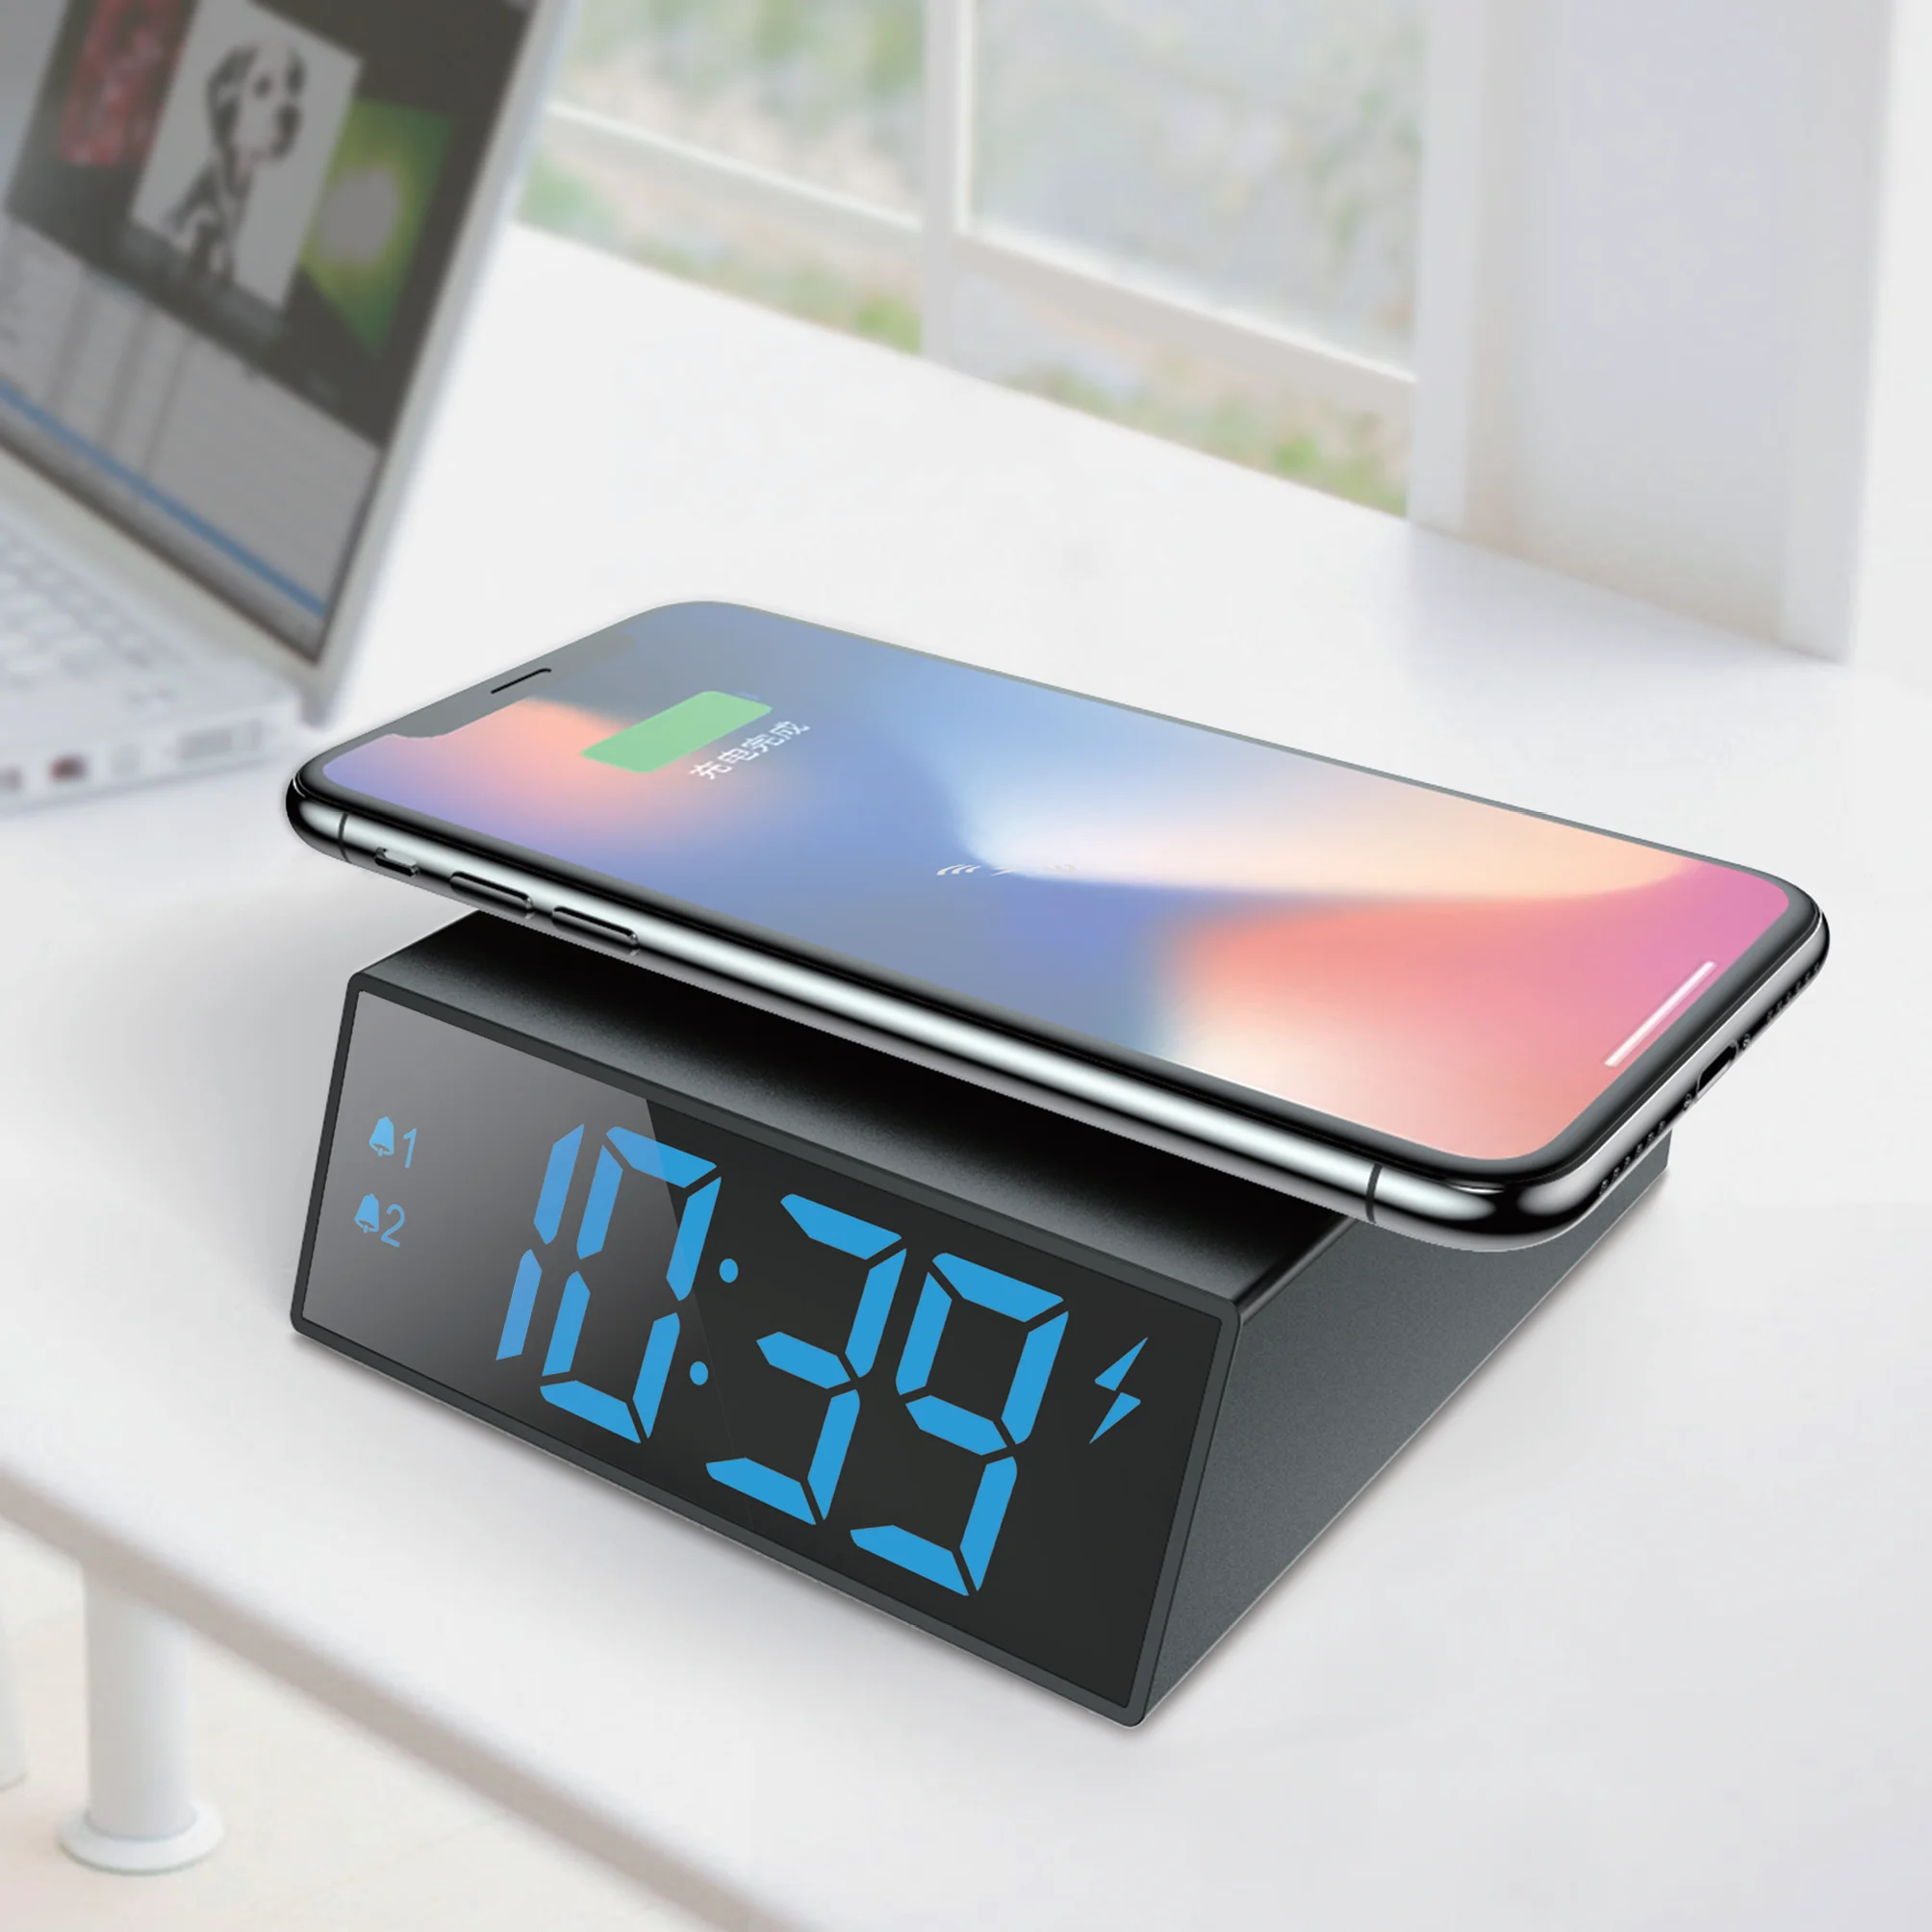 

2019 New Arrivals 10W Fast Charger Wireless 2 in 1 Wireless Charger For Mobile Phones, Black